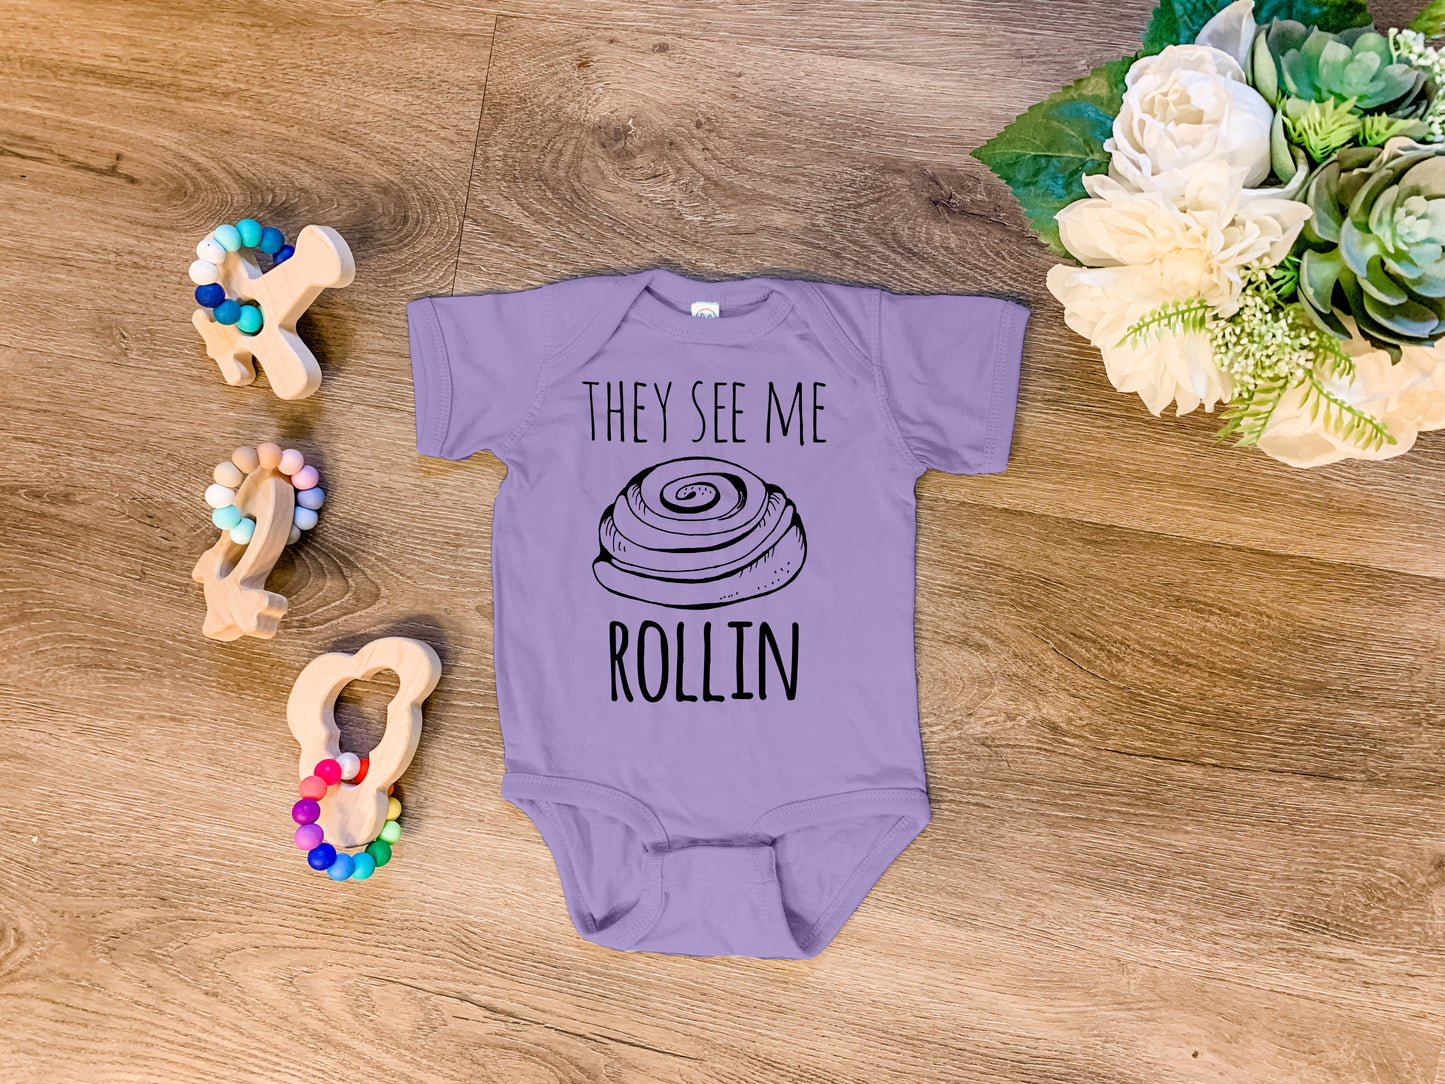 They See Me Rollin' (Cinnamon Roll) - Onesie - Heather Gray, Chill, or Lavender